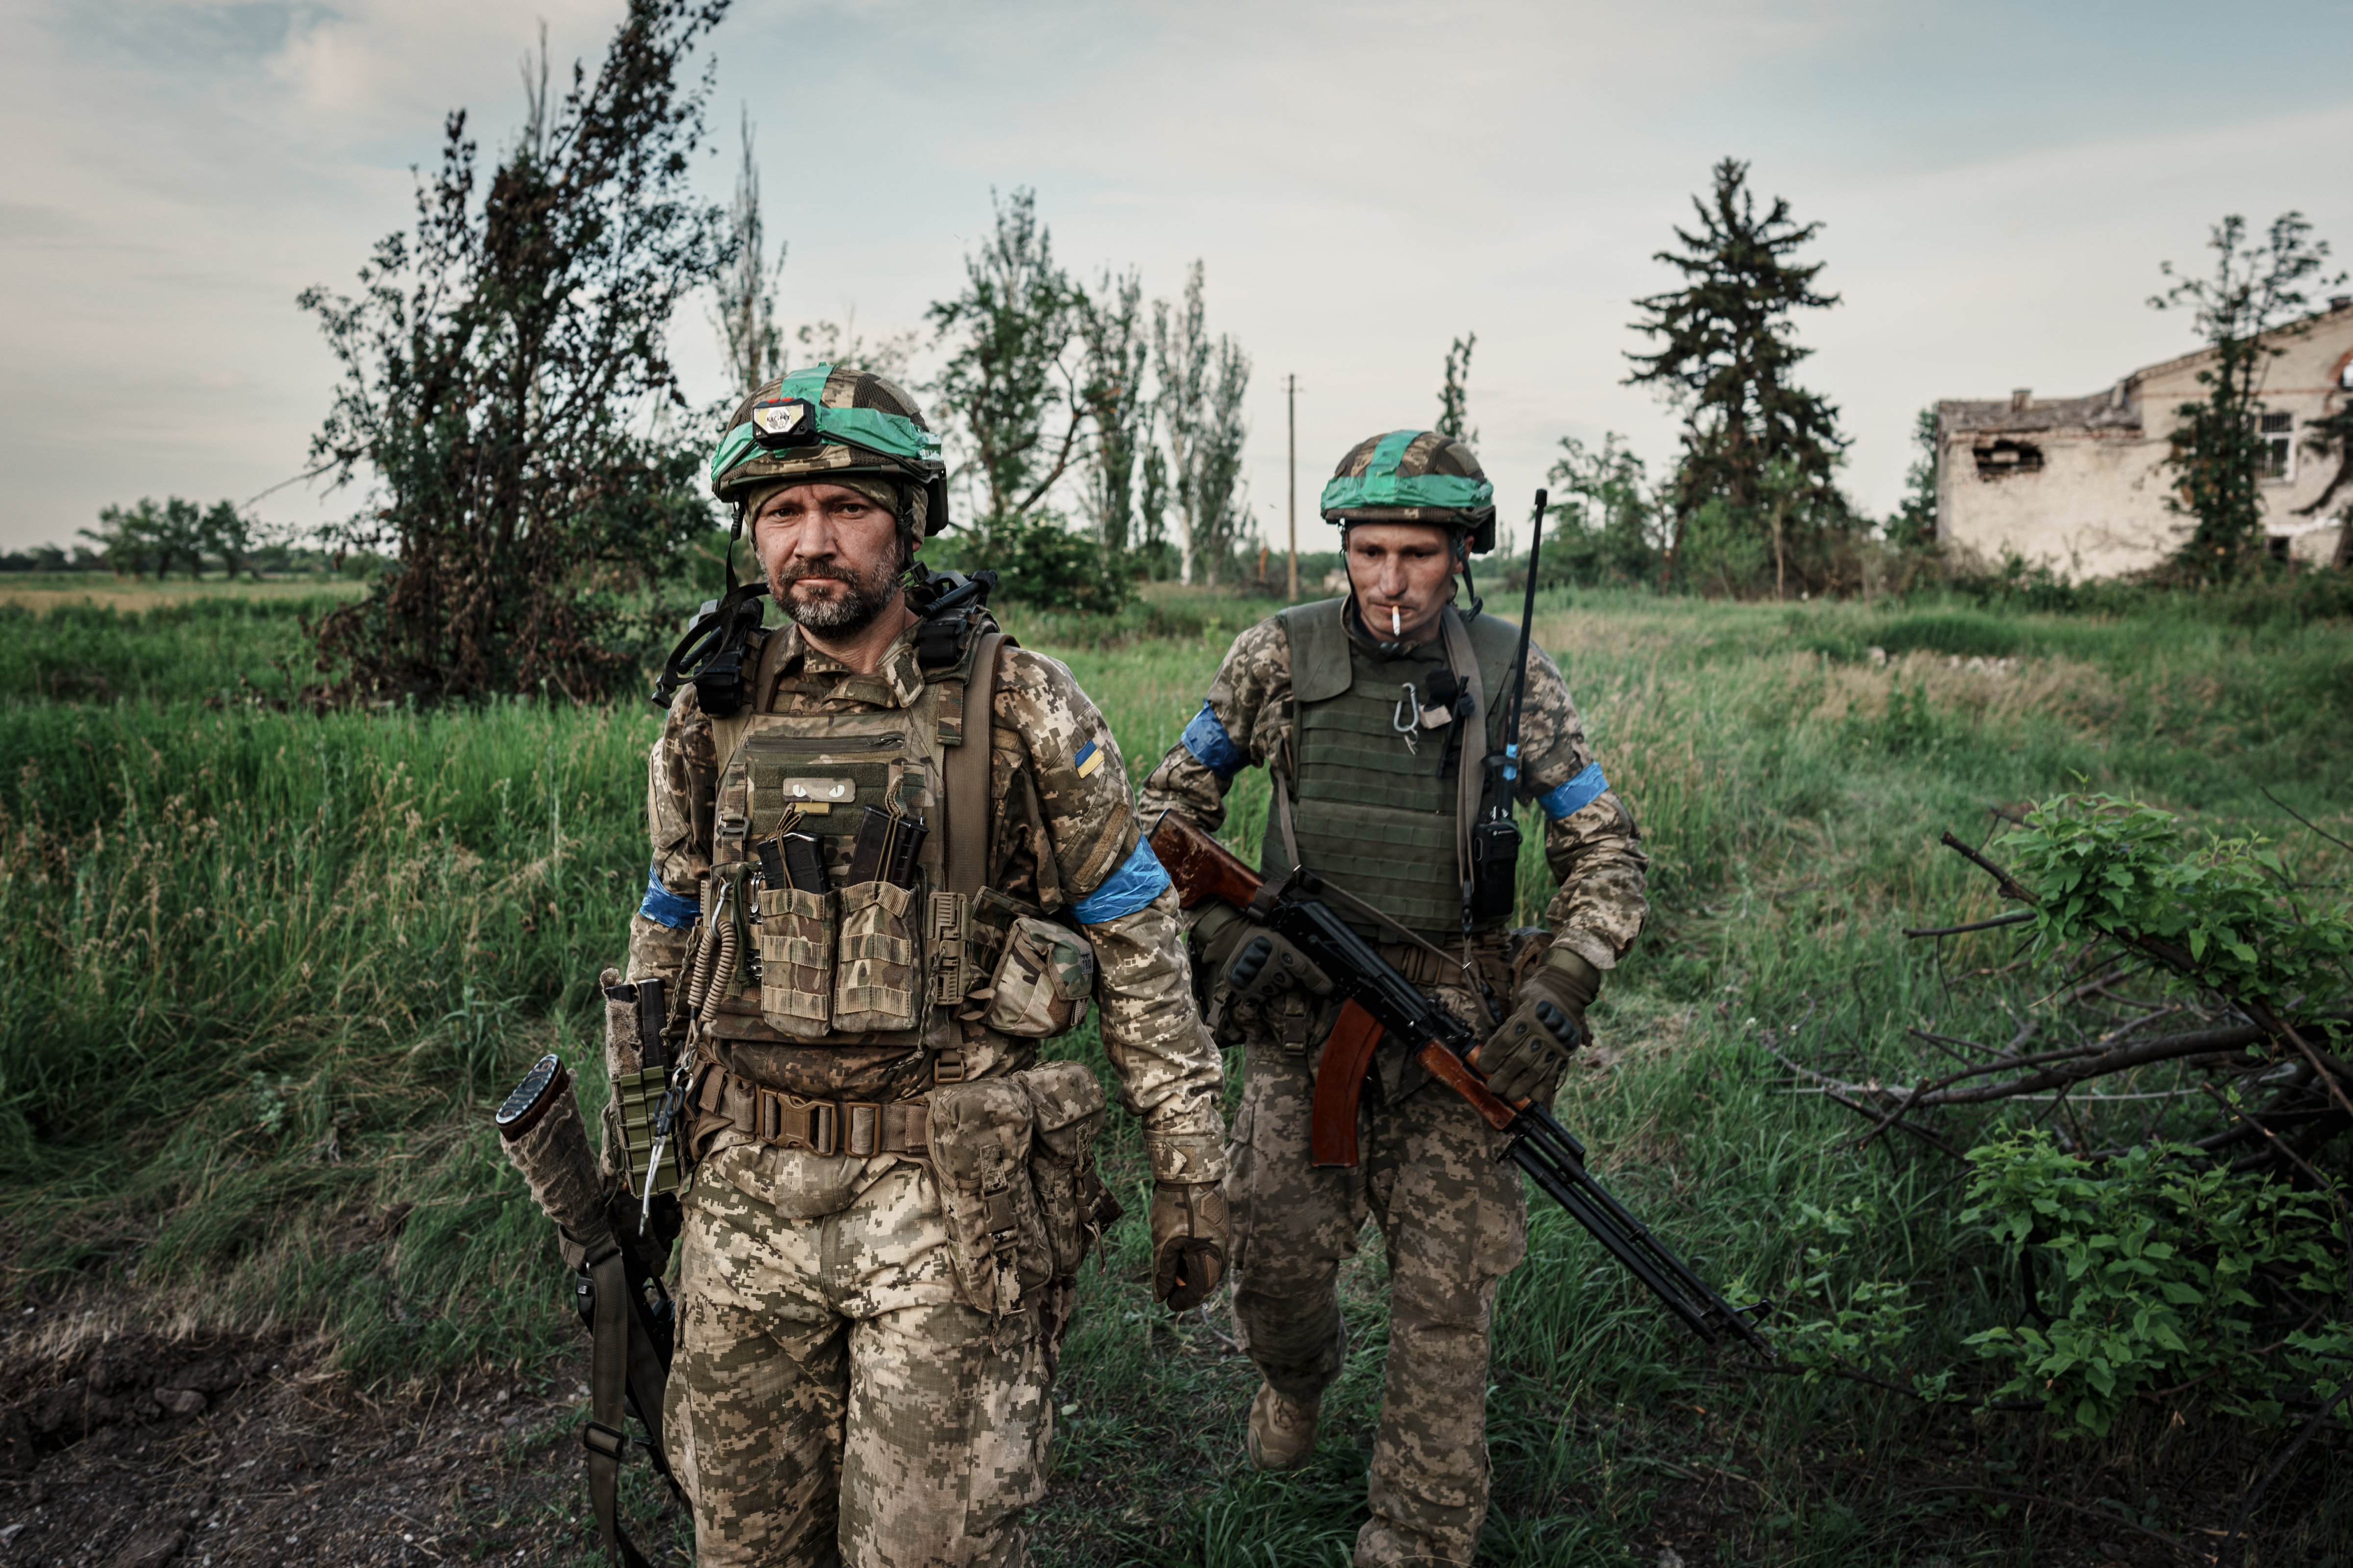 Soldiers of the 68th Jaeger Brigade "Oleksa Dovbush" walk in the newly liberated village on June 10, 2023 in Blahodatne, Ukraine. The village Blahodatne located on the border between Donetsk and Zaporizhzhia Oblasts. (Serhii Mykhalchuk–Global Images Ukraine/Getty Images)